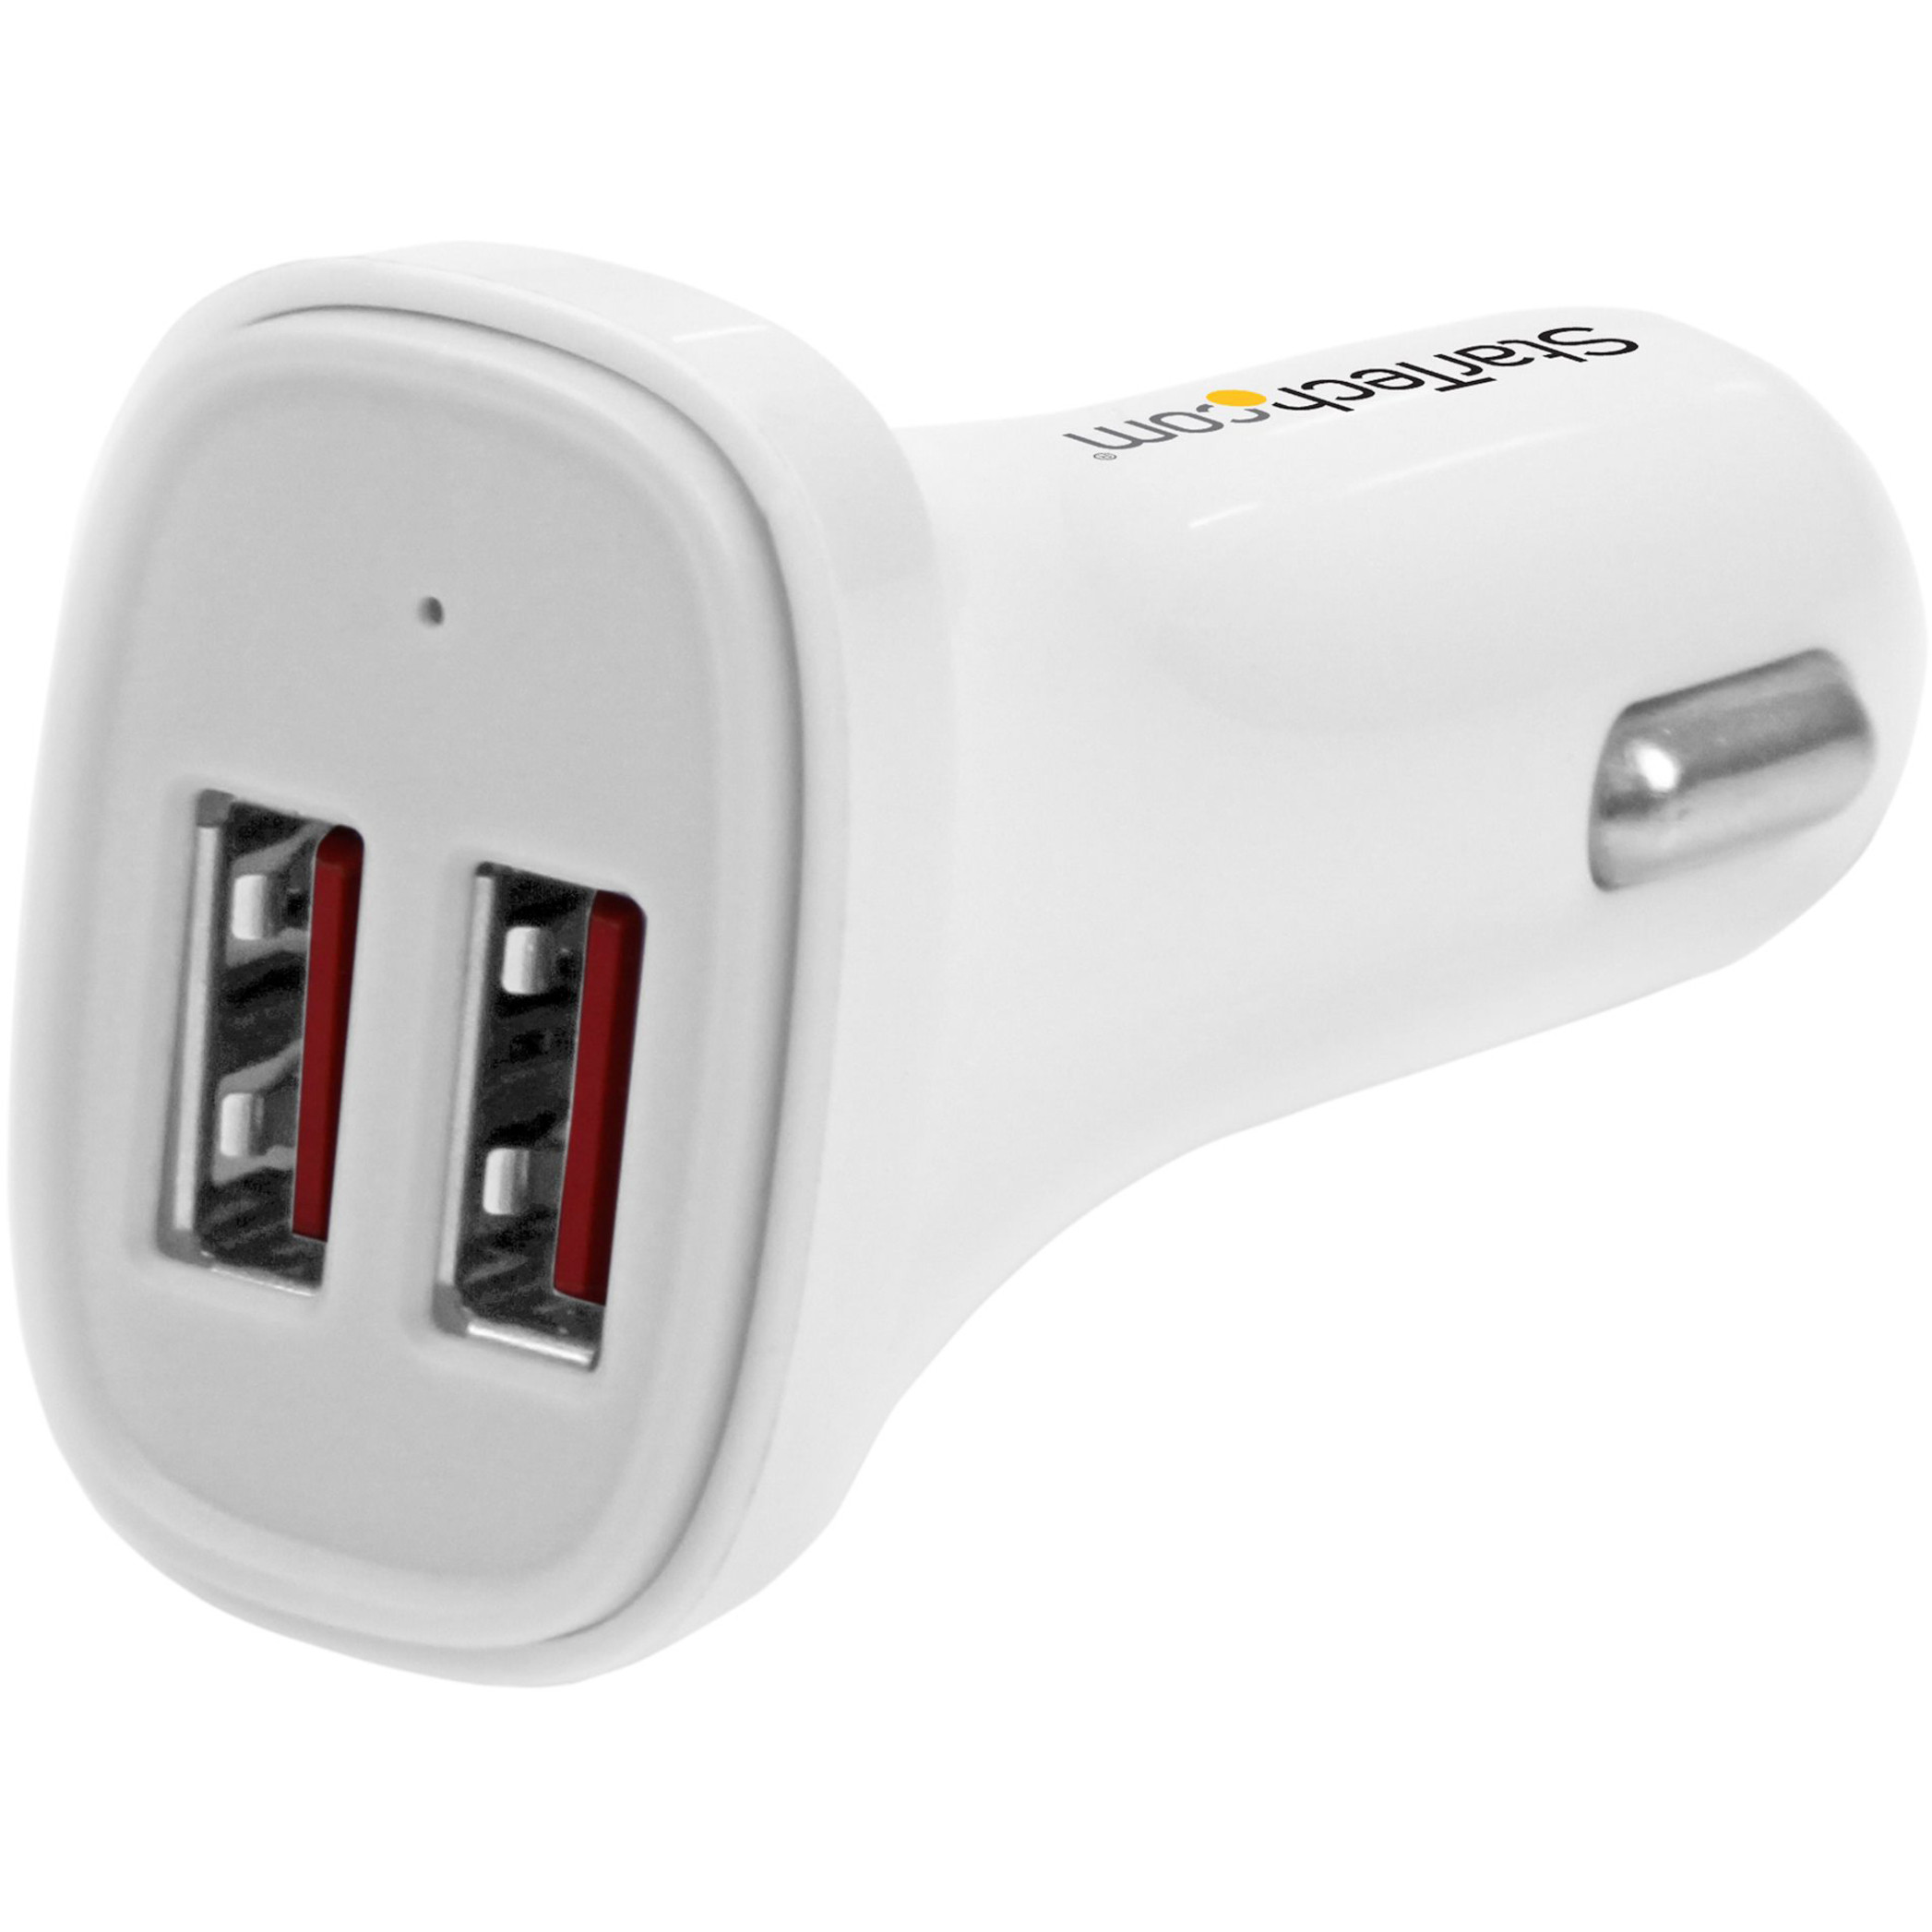 Startech .com Dual Port USB Car ChargerWhiteHigh Power 24W/4.8A2 port USB Car ChargerCharge two tablets at onceCharge two tabl… USB2PCARWHS